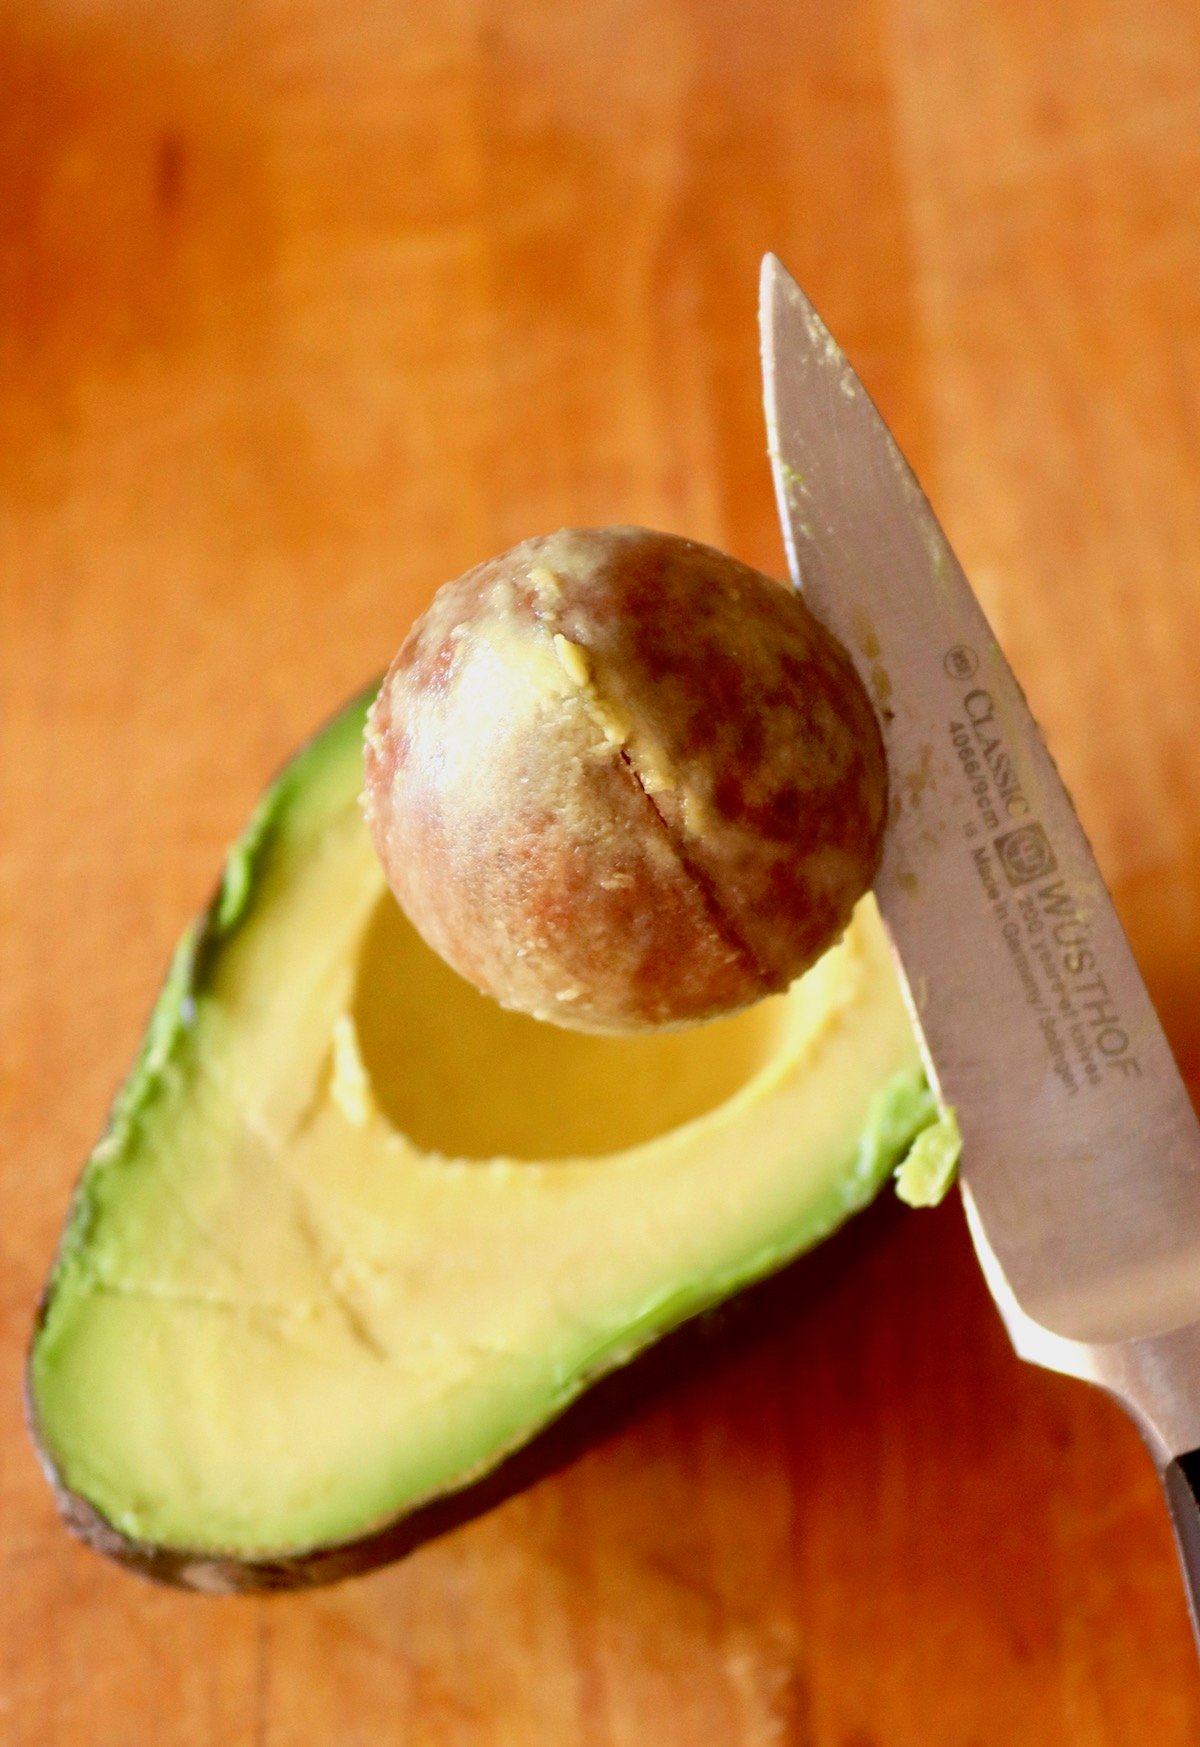 Avocado half on wood board with the pit in the air above it, with a paring knife stuck to it.